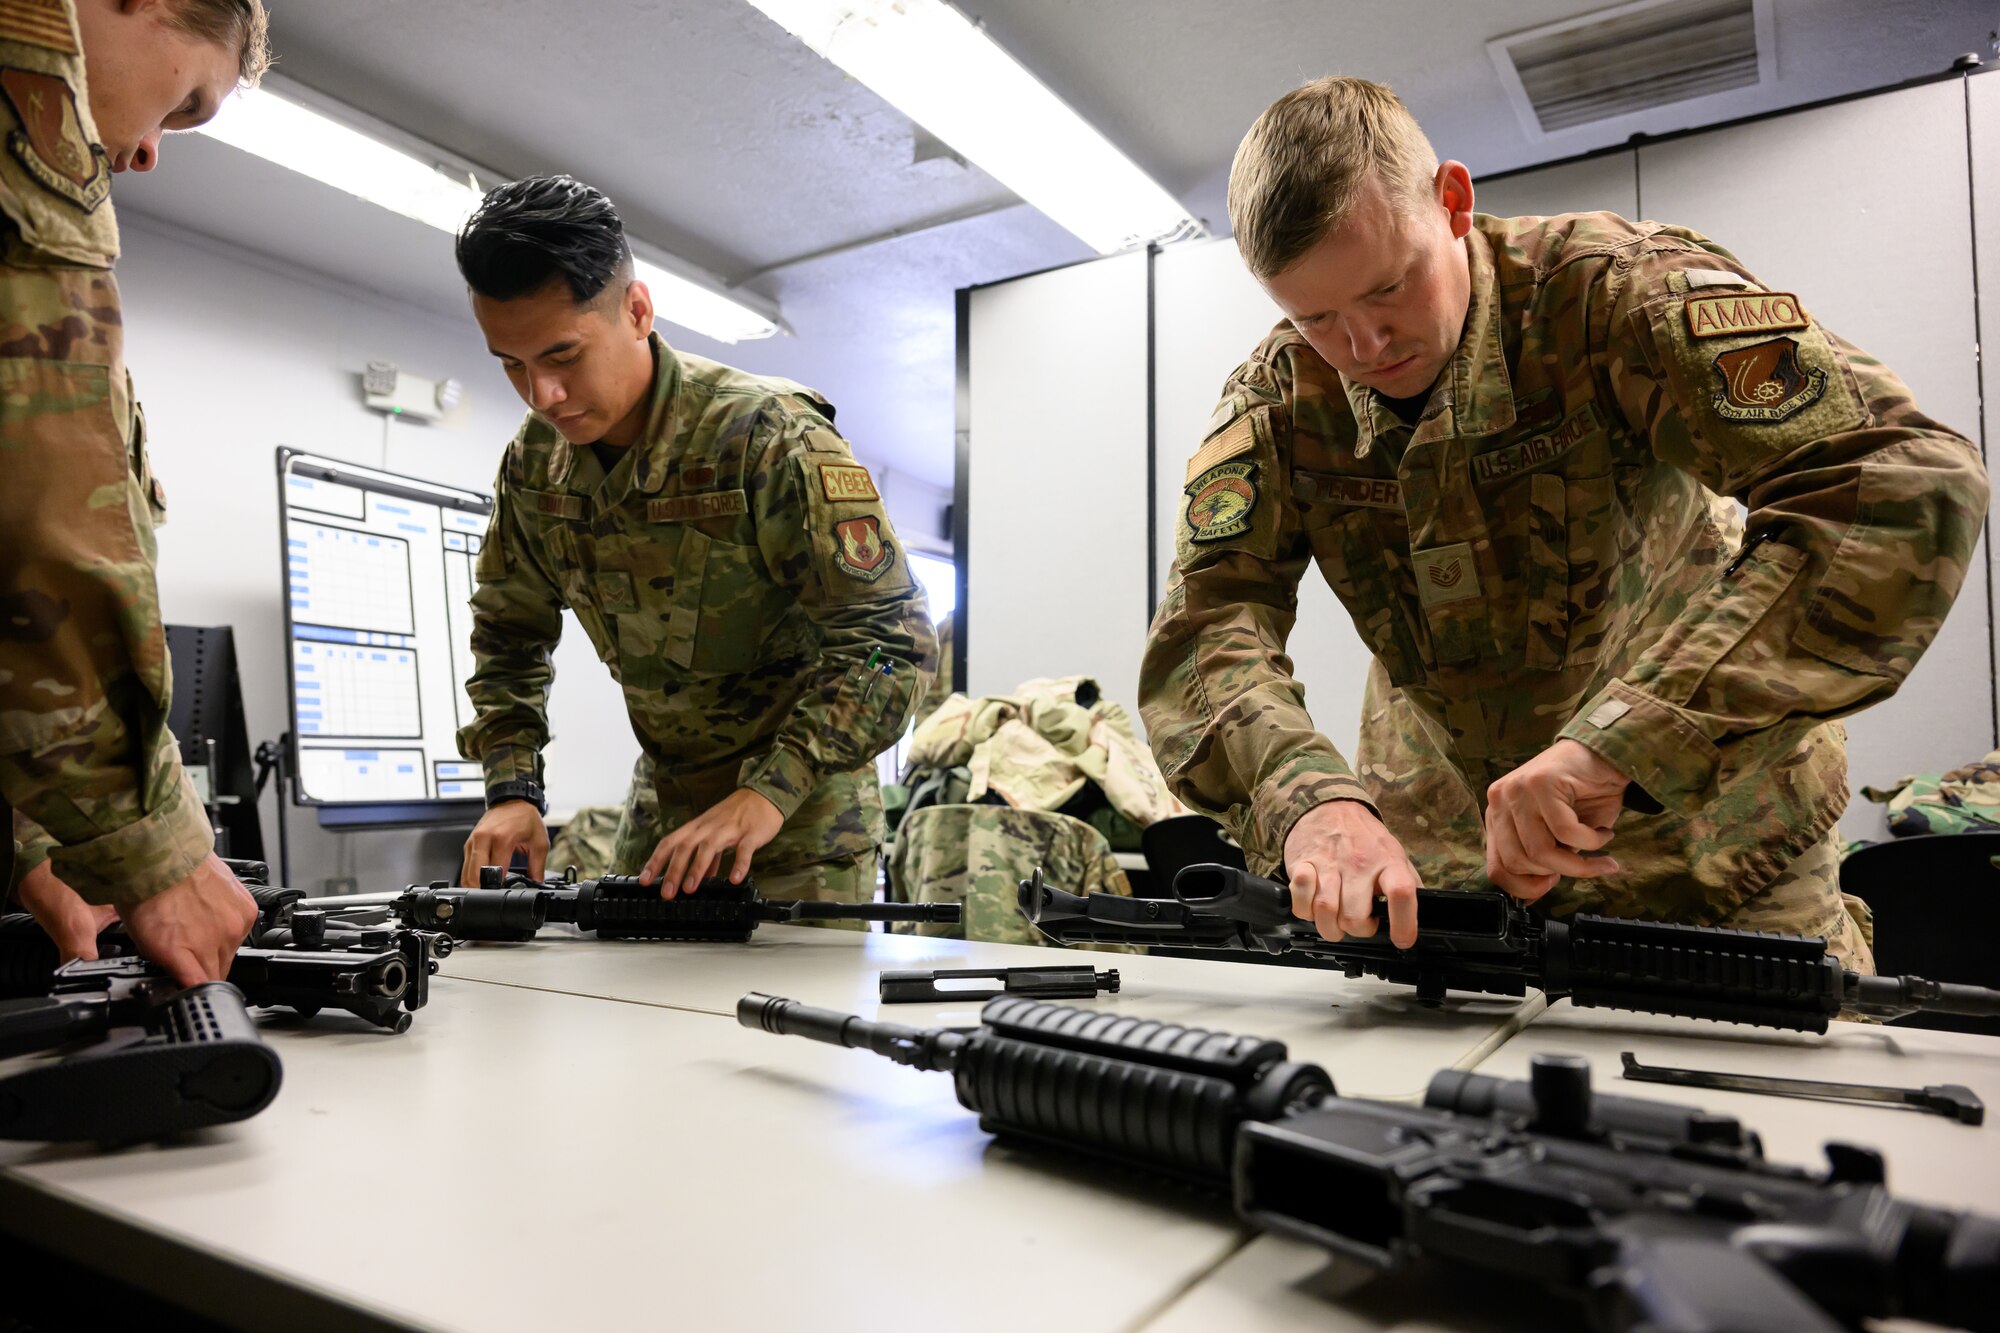 Right, Tech. Sgt. Kraig Fender and Airman 1st Class Addison Cuadra, 75th Air Base Wing, tear down weapons during an Ability to Survive and Operate rodeo (ATSO) at Hill Air Force Base, Utah, Sept. 13, 2022.